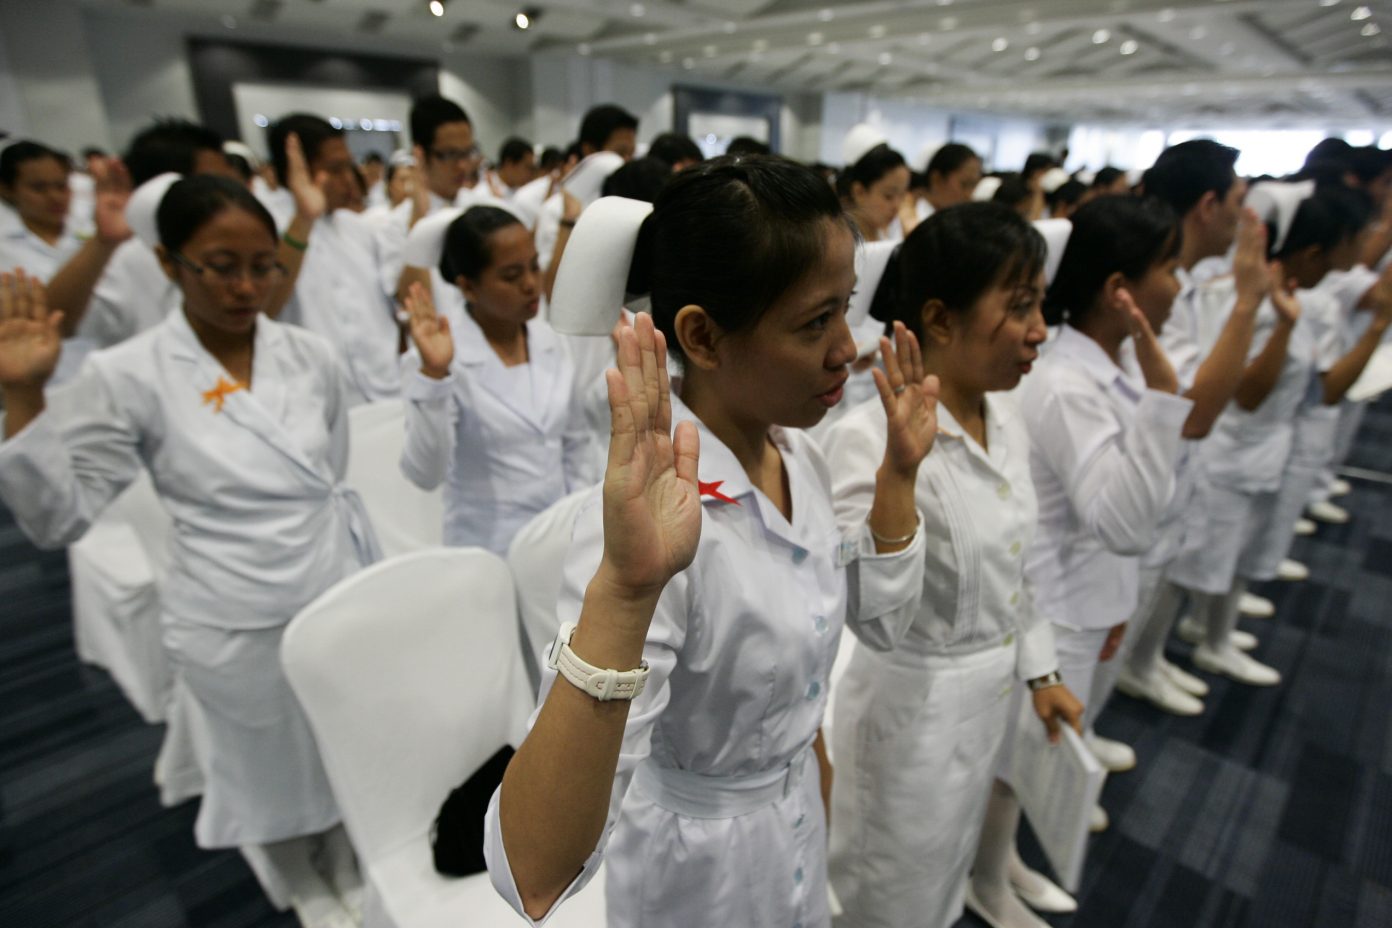 Philippines aims to deploy more nurses, healthcare staff overseas